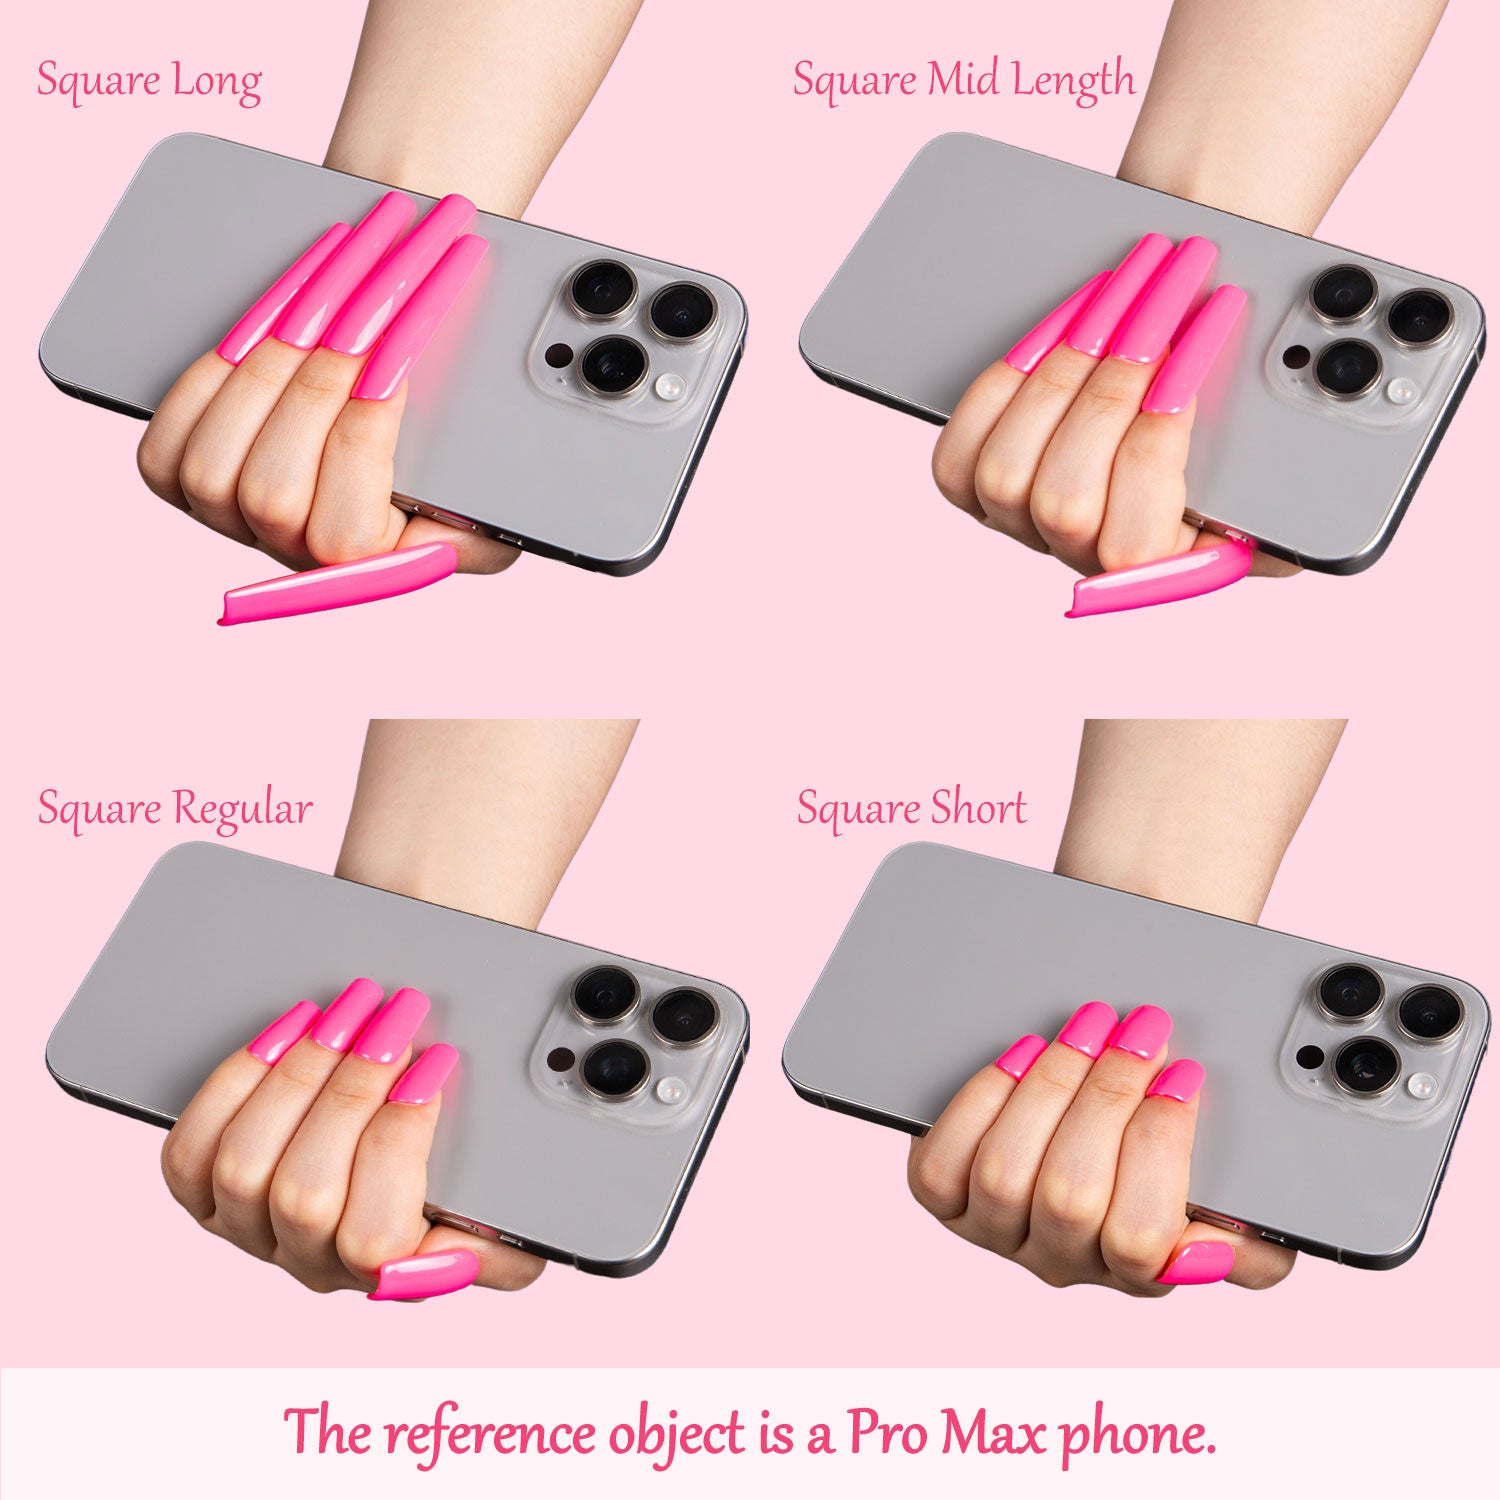 Four lengths of bright pink square-shaped press-on nails showcased by hand holding a Pro Max phone.